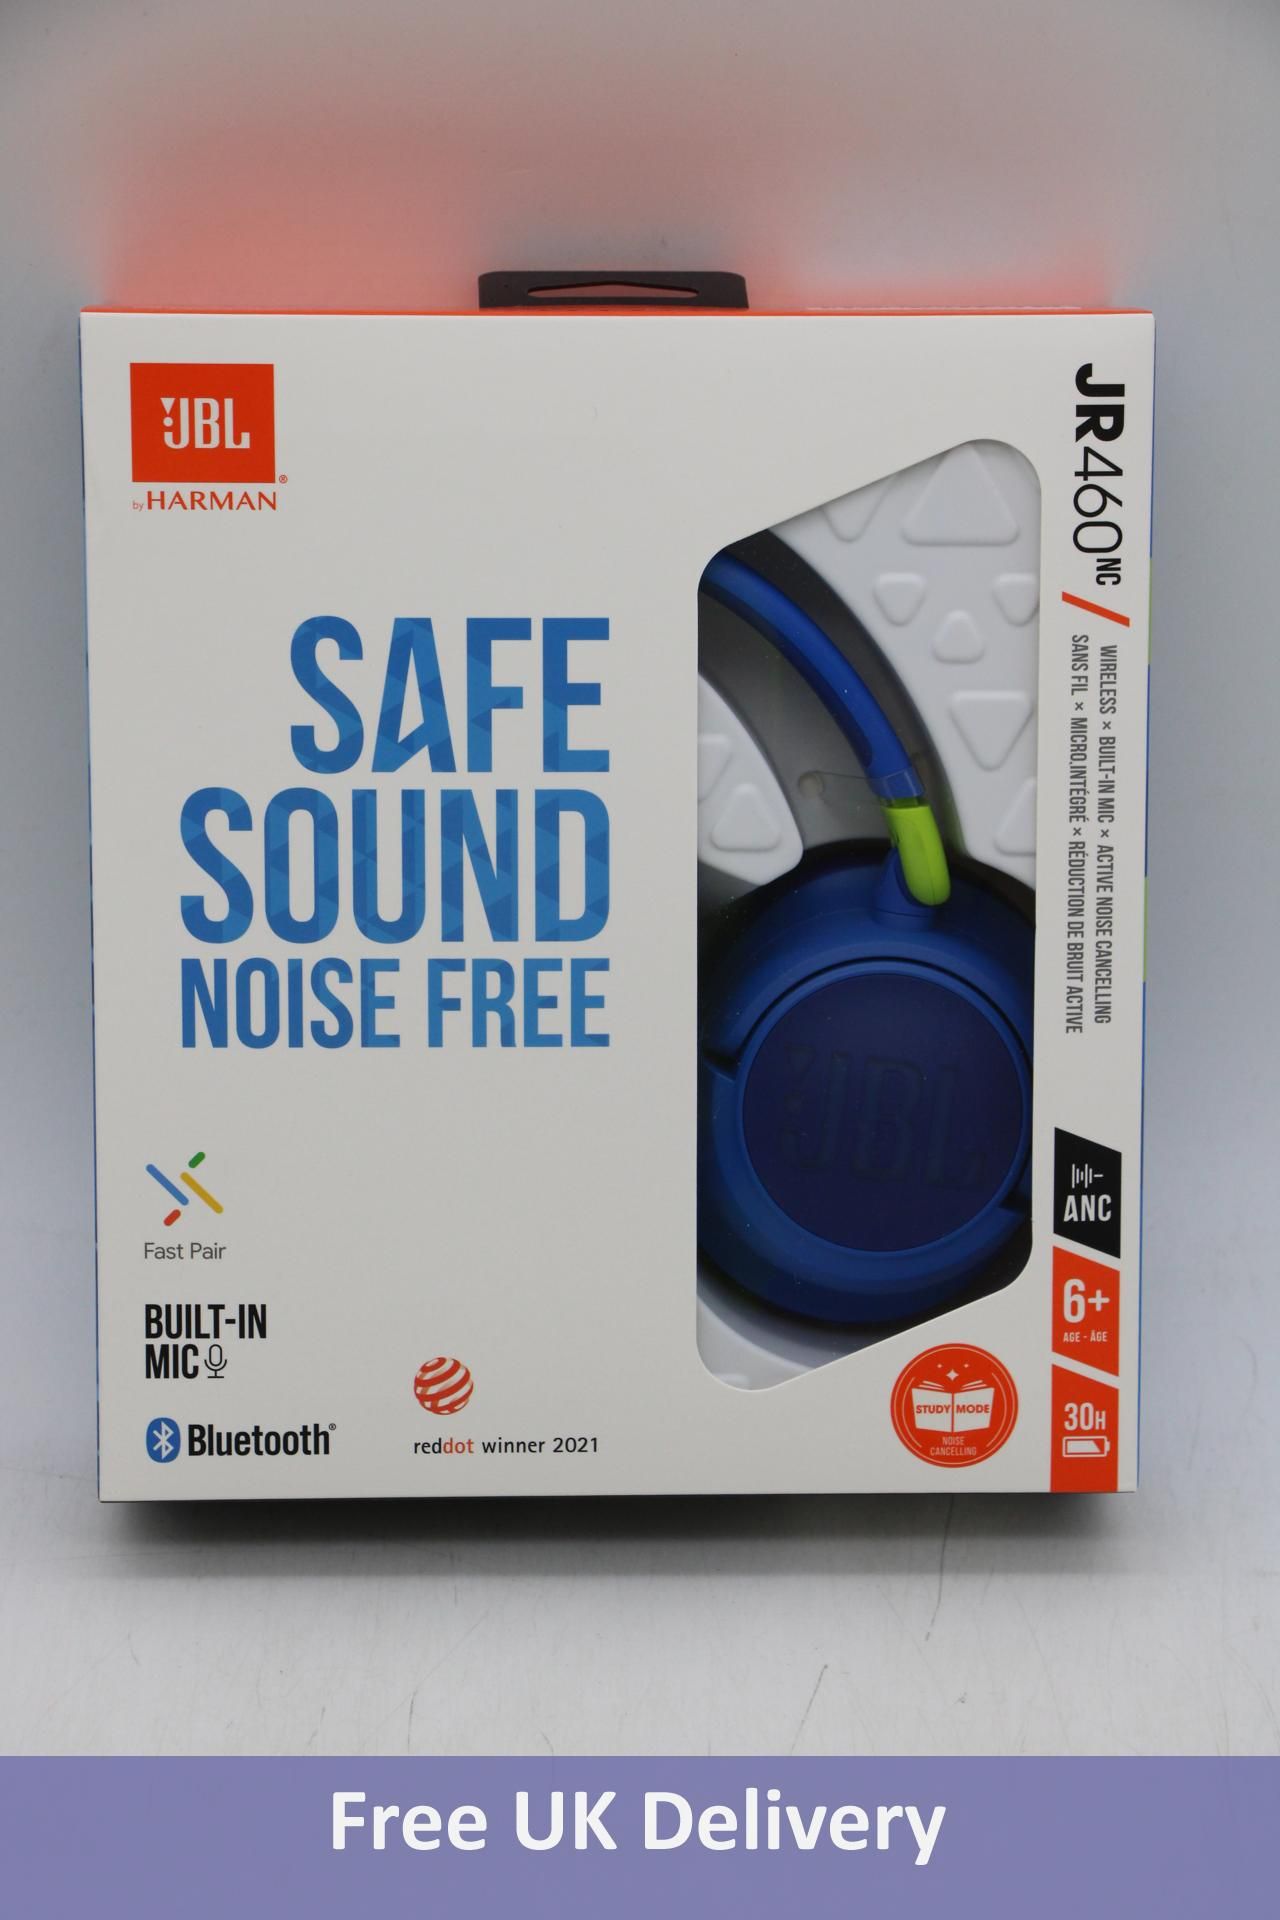 JBL Harman Safe Sound Noise Free JR460NC Wireless Headphones with Built In Mic, Blue